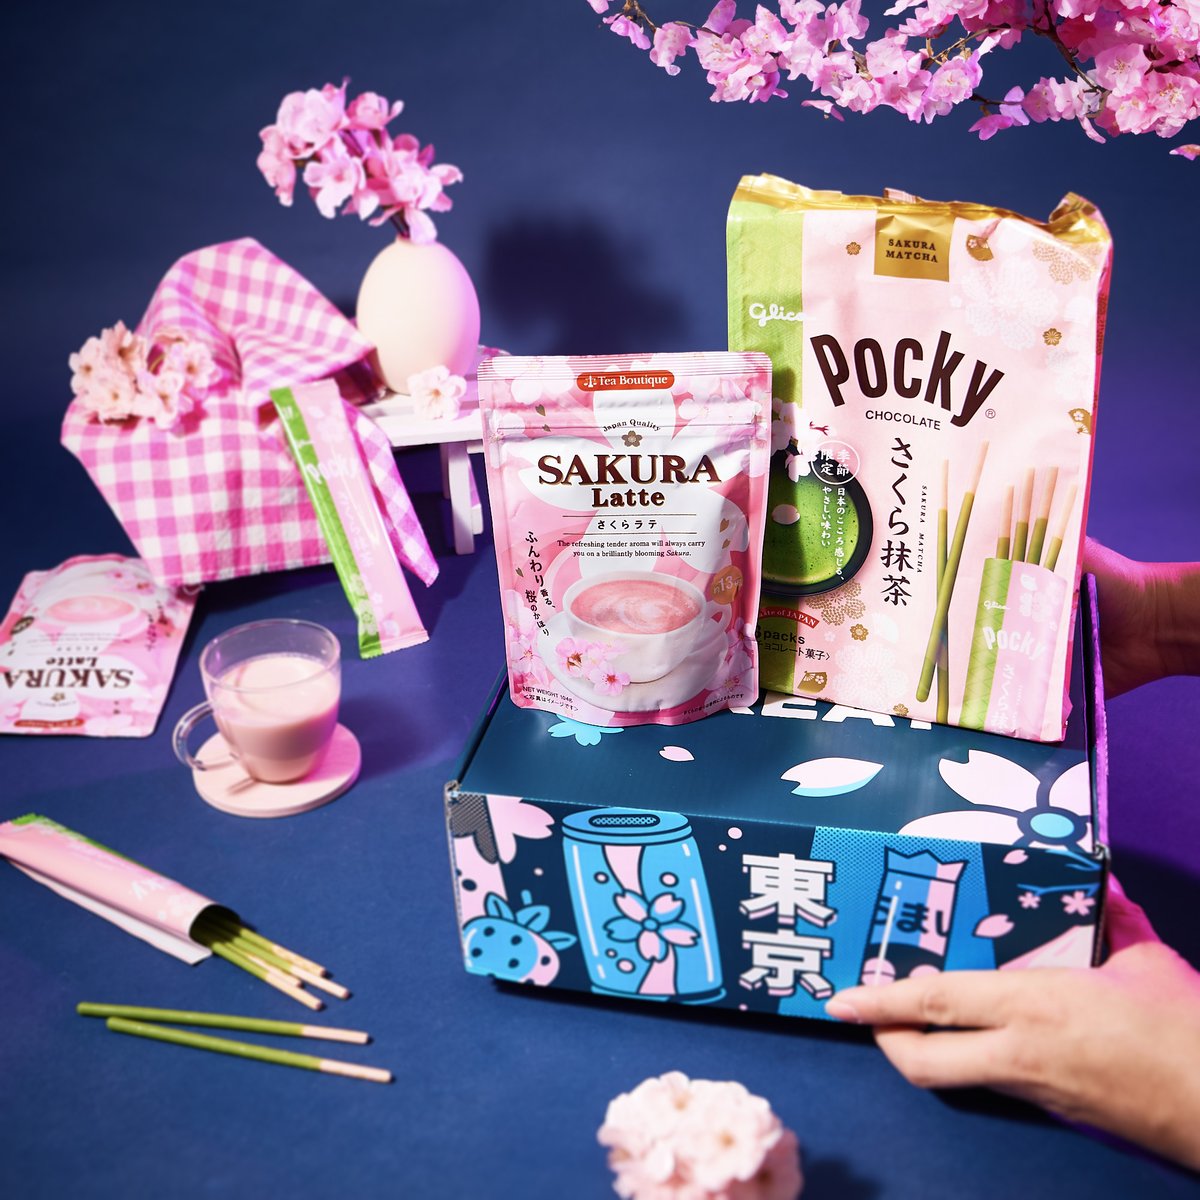 🌸Cherry blossom season is ending!🥹 FINAL CALL to get FREE bonus sakura items from Japan when you subscribe to TokyoTreat!🎌*For multi-month plans only. Subscribe by 4/22!🌟🔗tokyotreat.com/promo/treats24